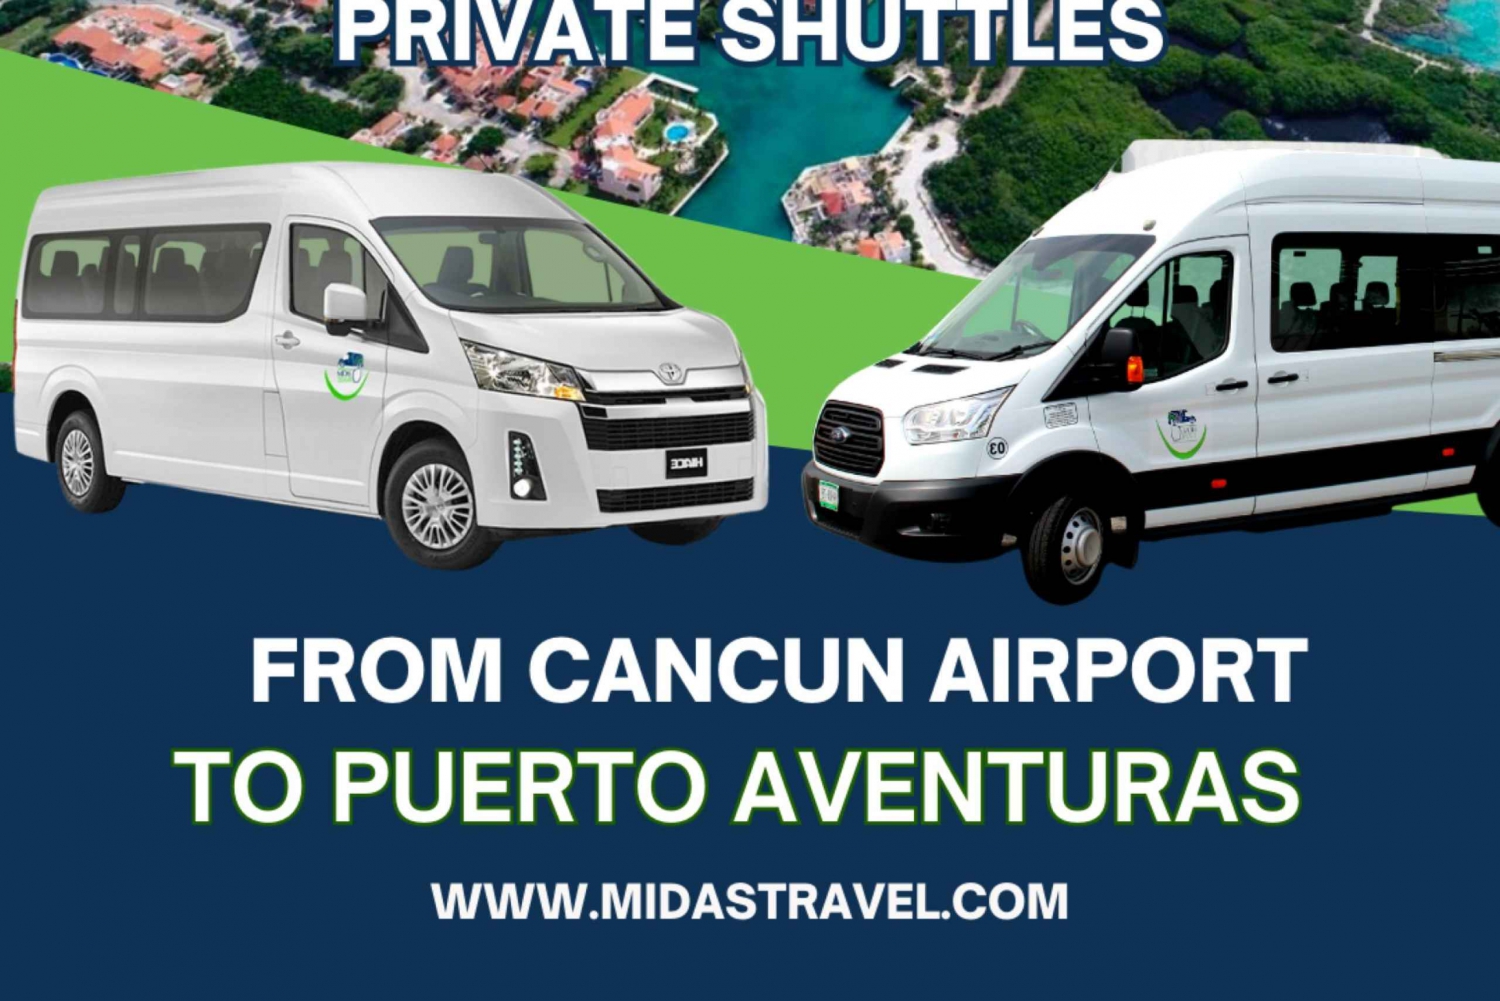 Cancun Round-Trip or One-Way Transfer to Puerto Aventuras